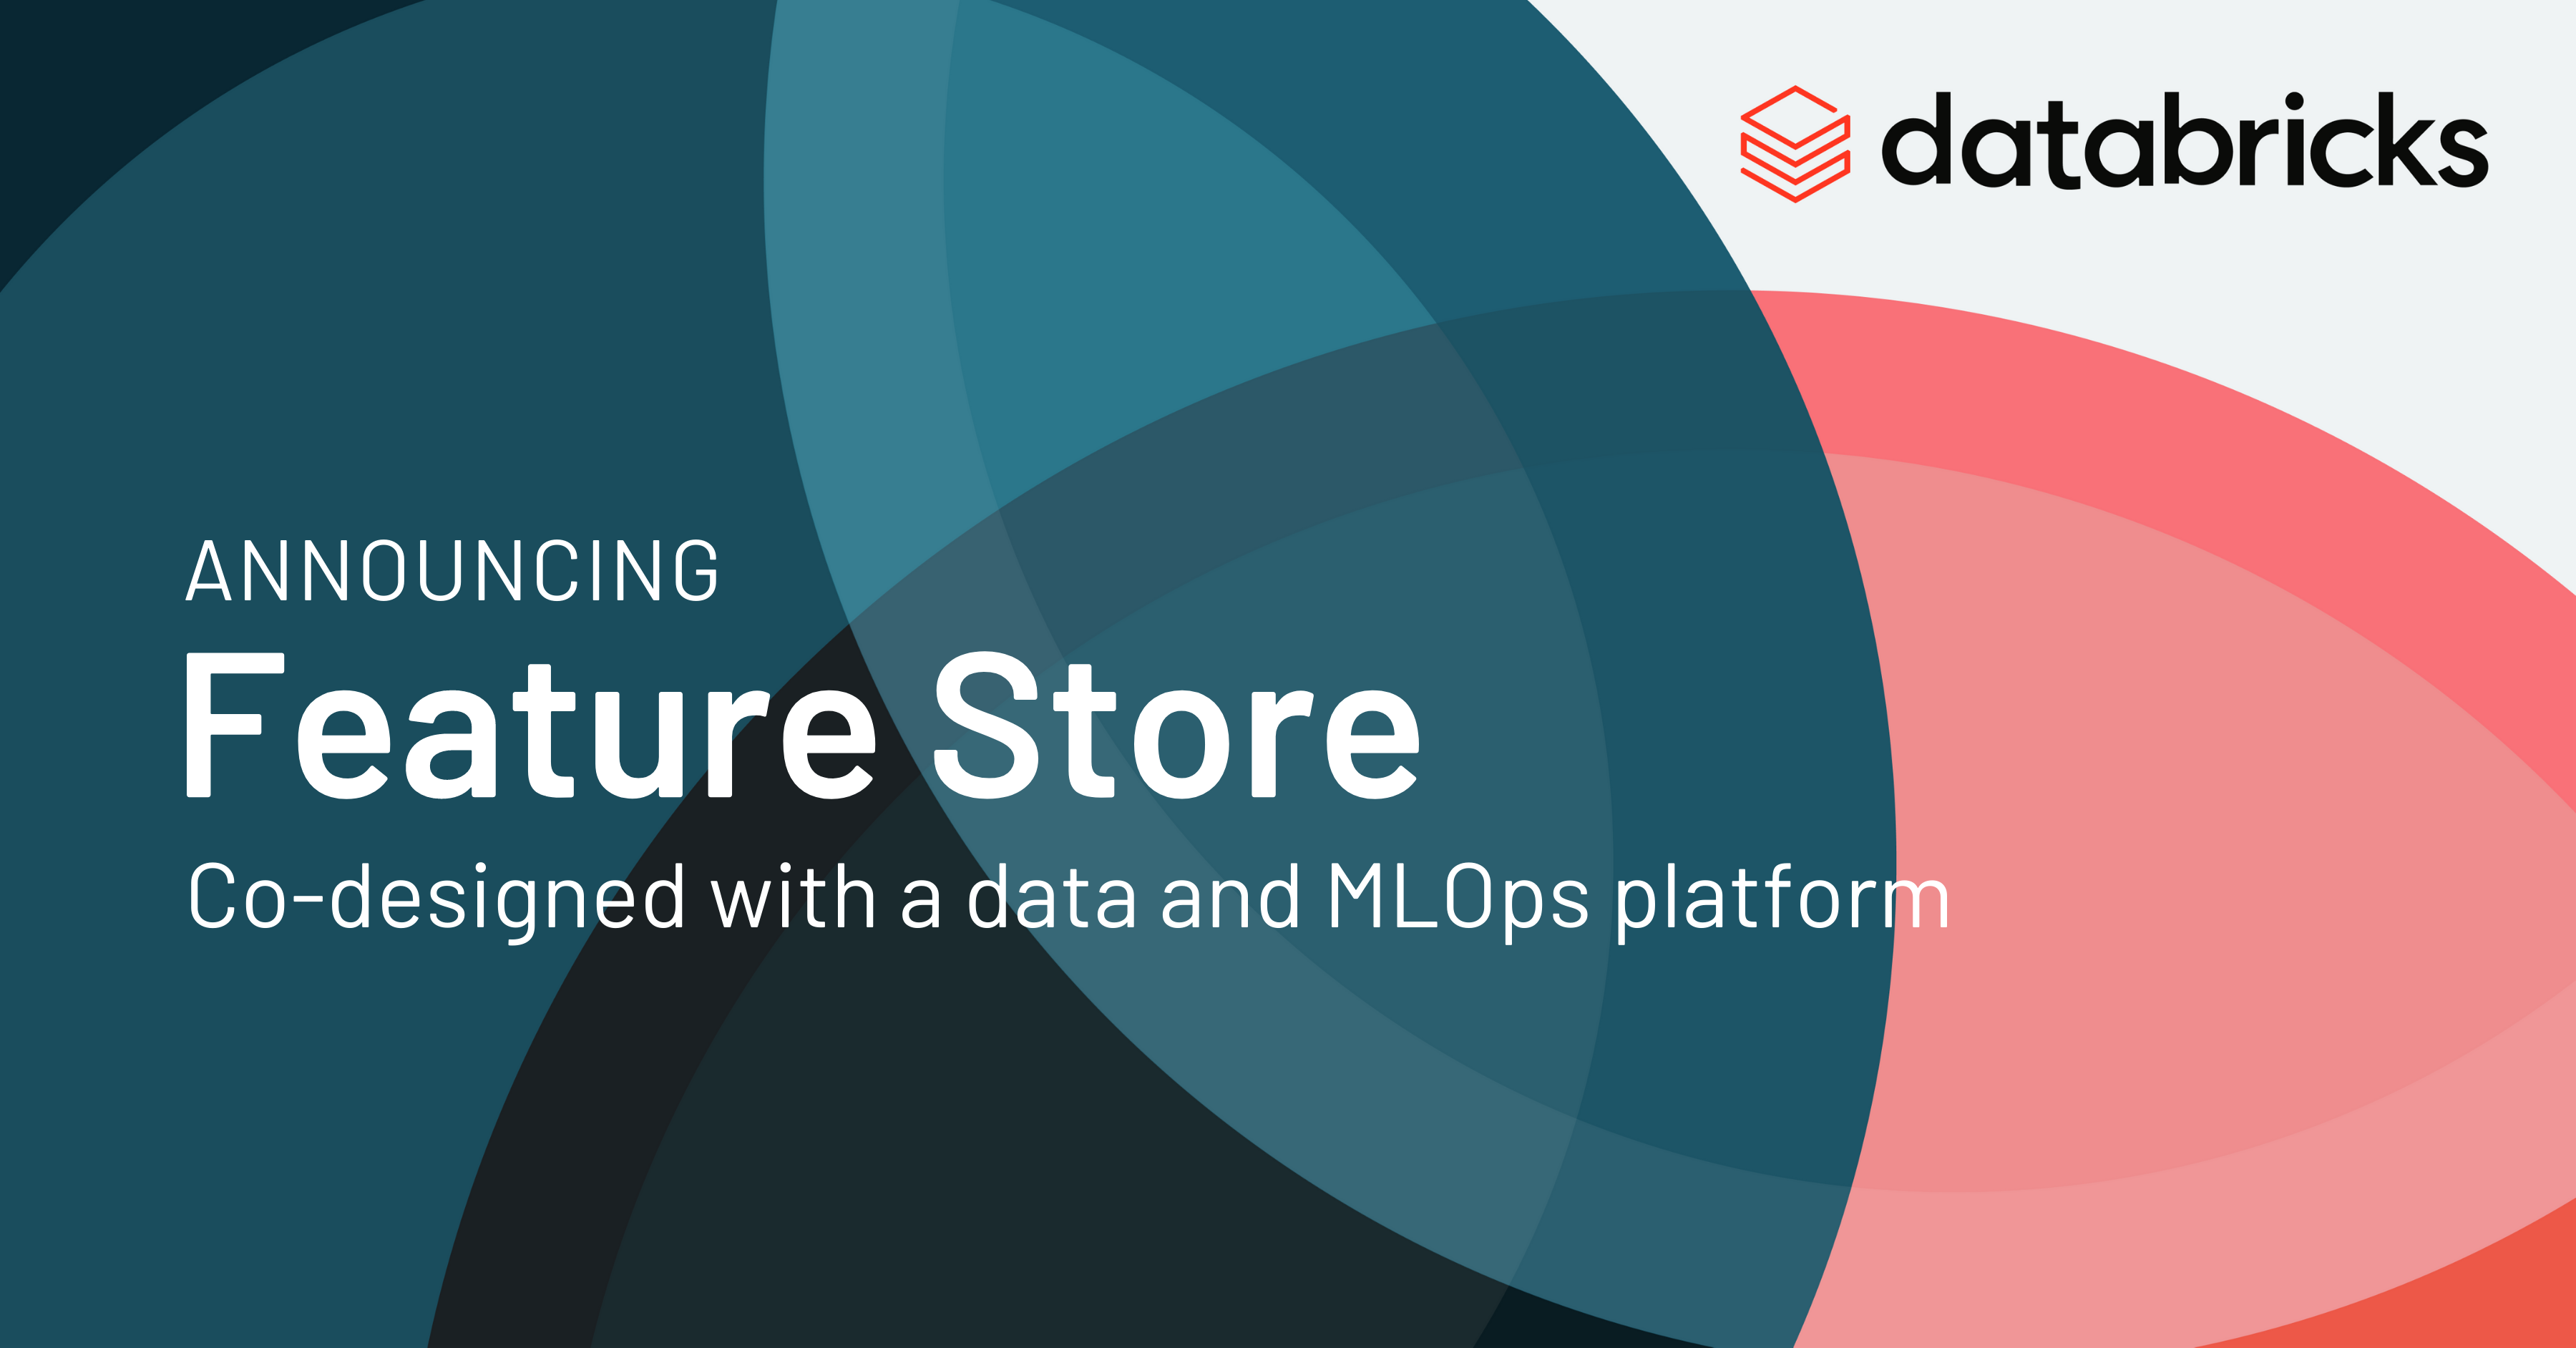 Today, we announced the launch of the Databricks Feature Store, the first of its kind that has been co-designed with Delta Lake and MLflow to accelera